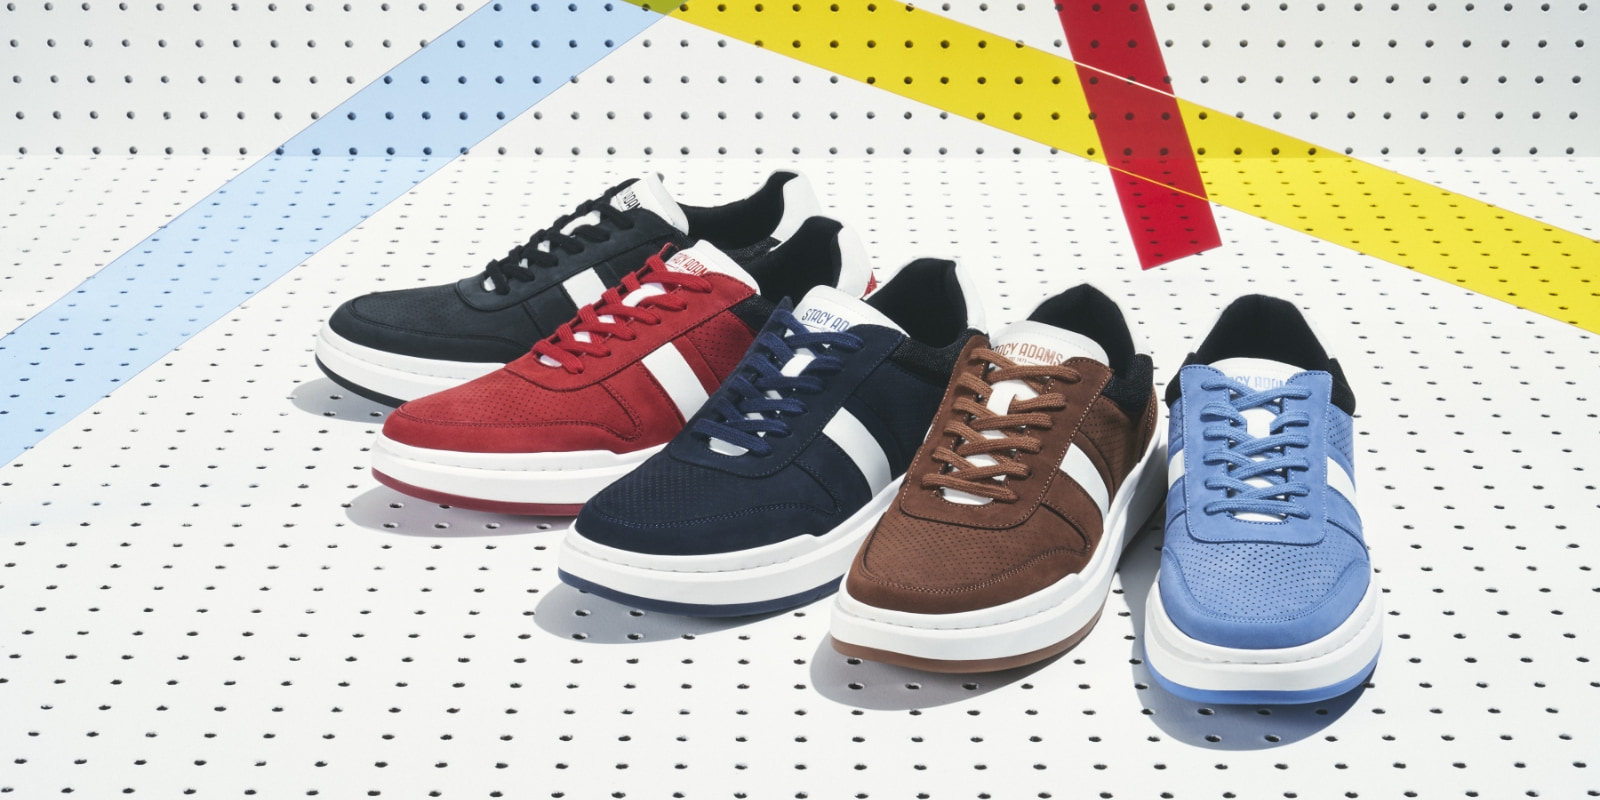 The featured image is the Currier Moc Toe Lace Up Sneaker in Black, Red, Navy, Cognac, and French Blue.